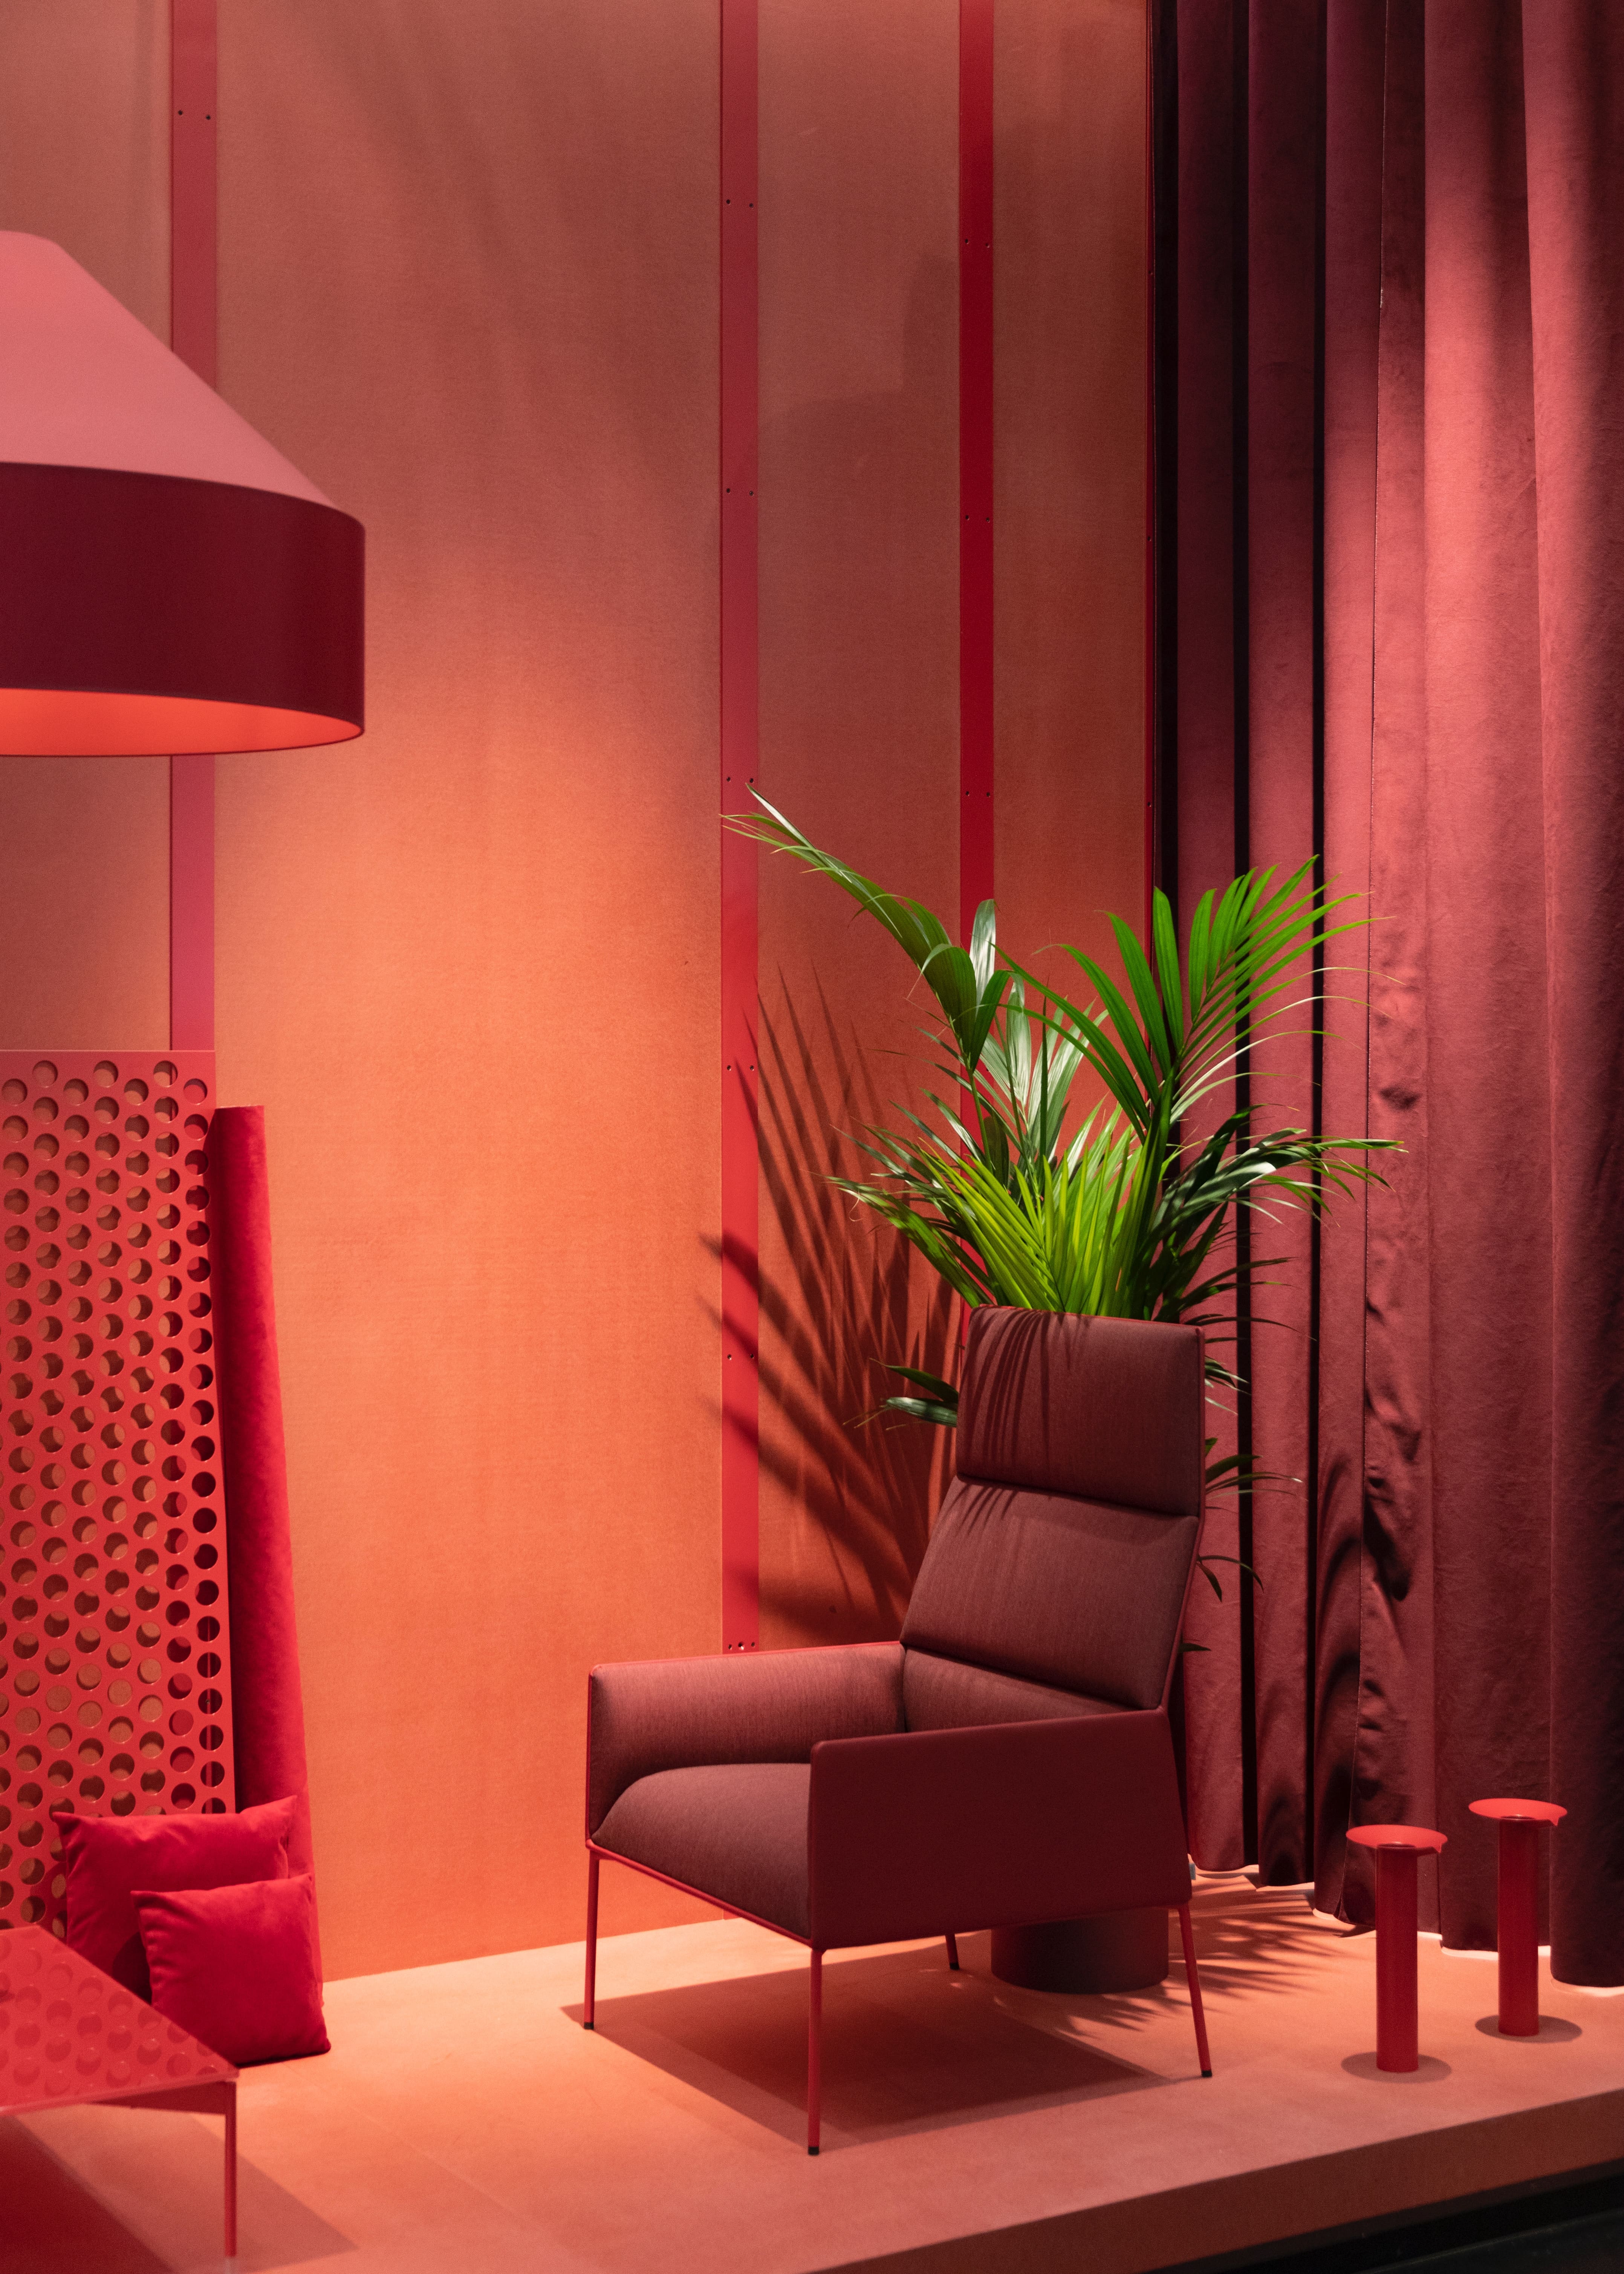 Stylish Red colored room with a chair and a sapling